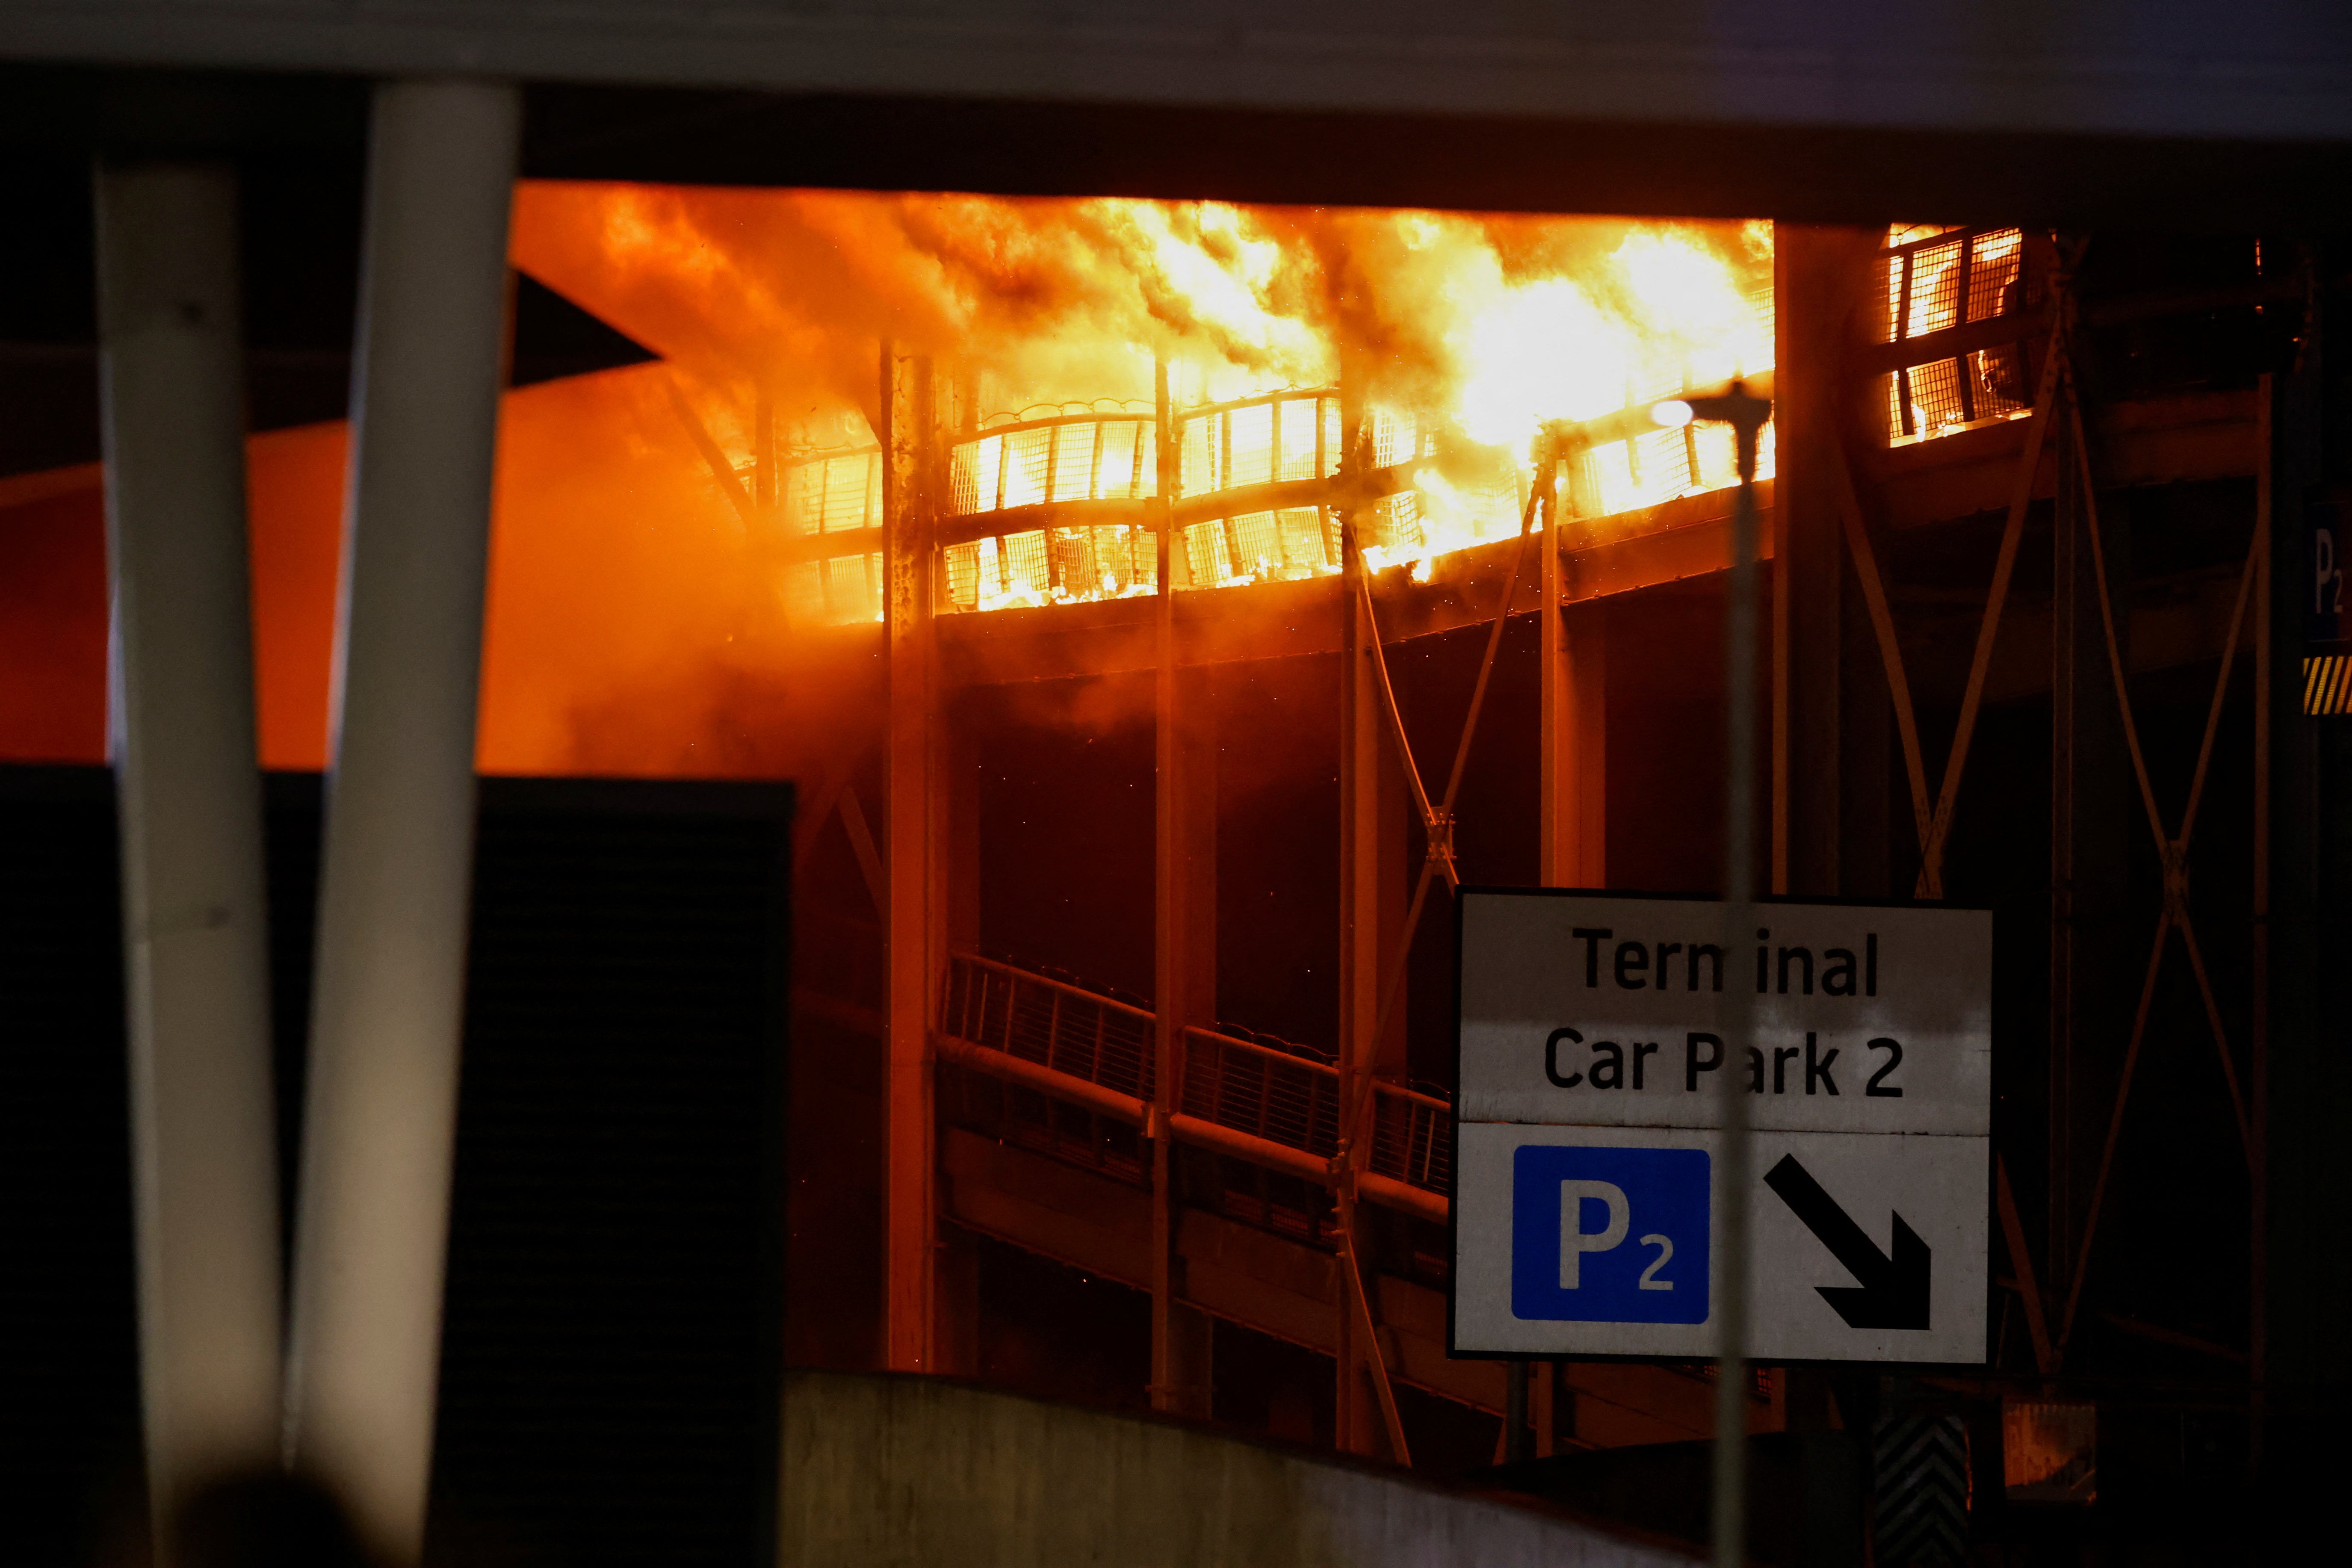 A vehicle fire caused the London Luton airport car park to partially collapse